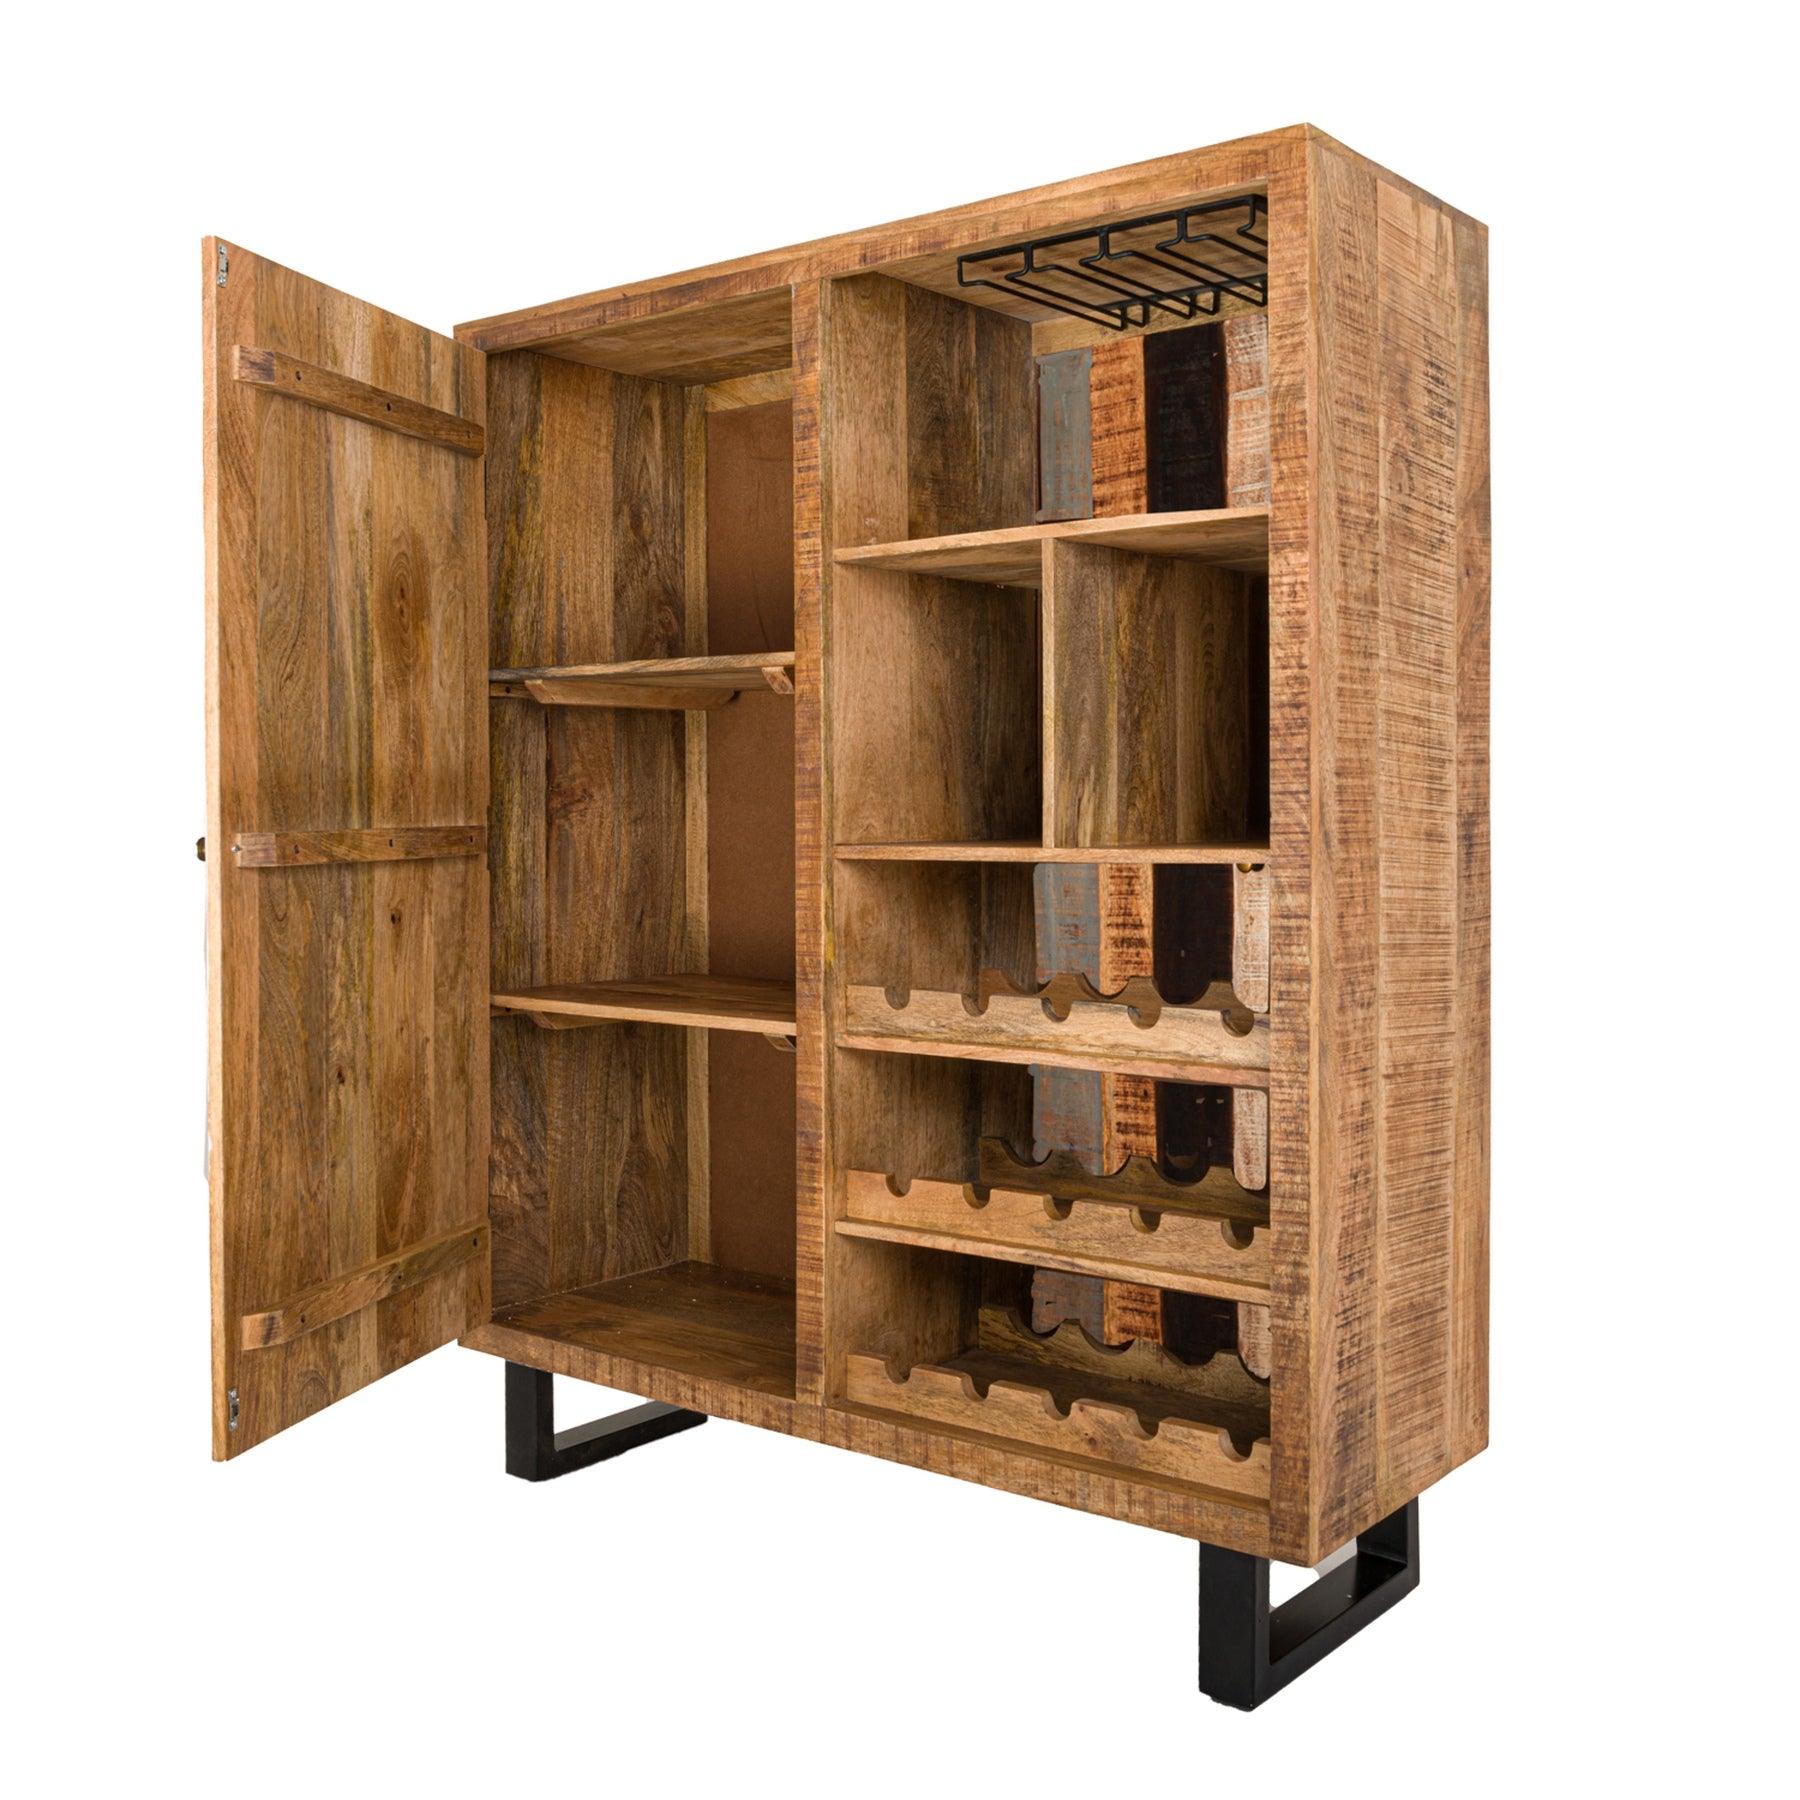 Reclaimed Wood Drinks Cabinet - Industrial Collection - Charming Spaces